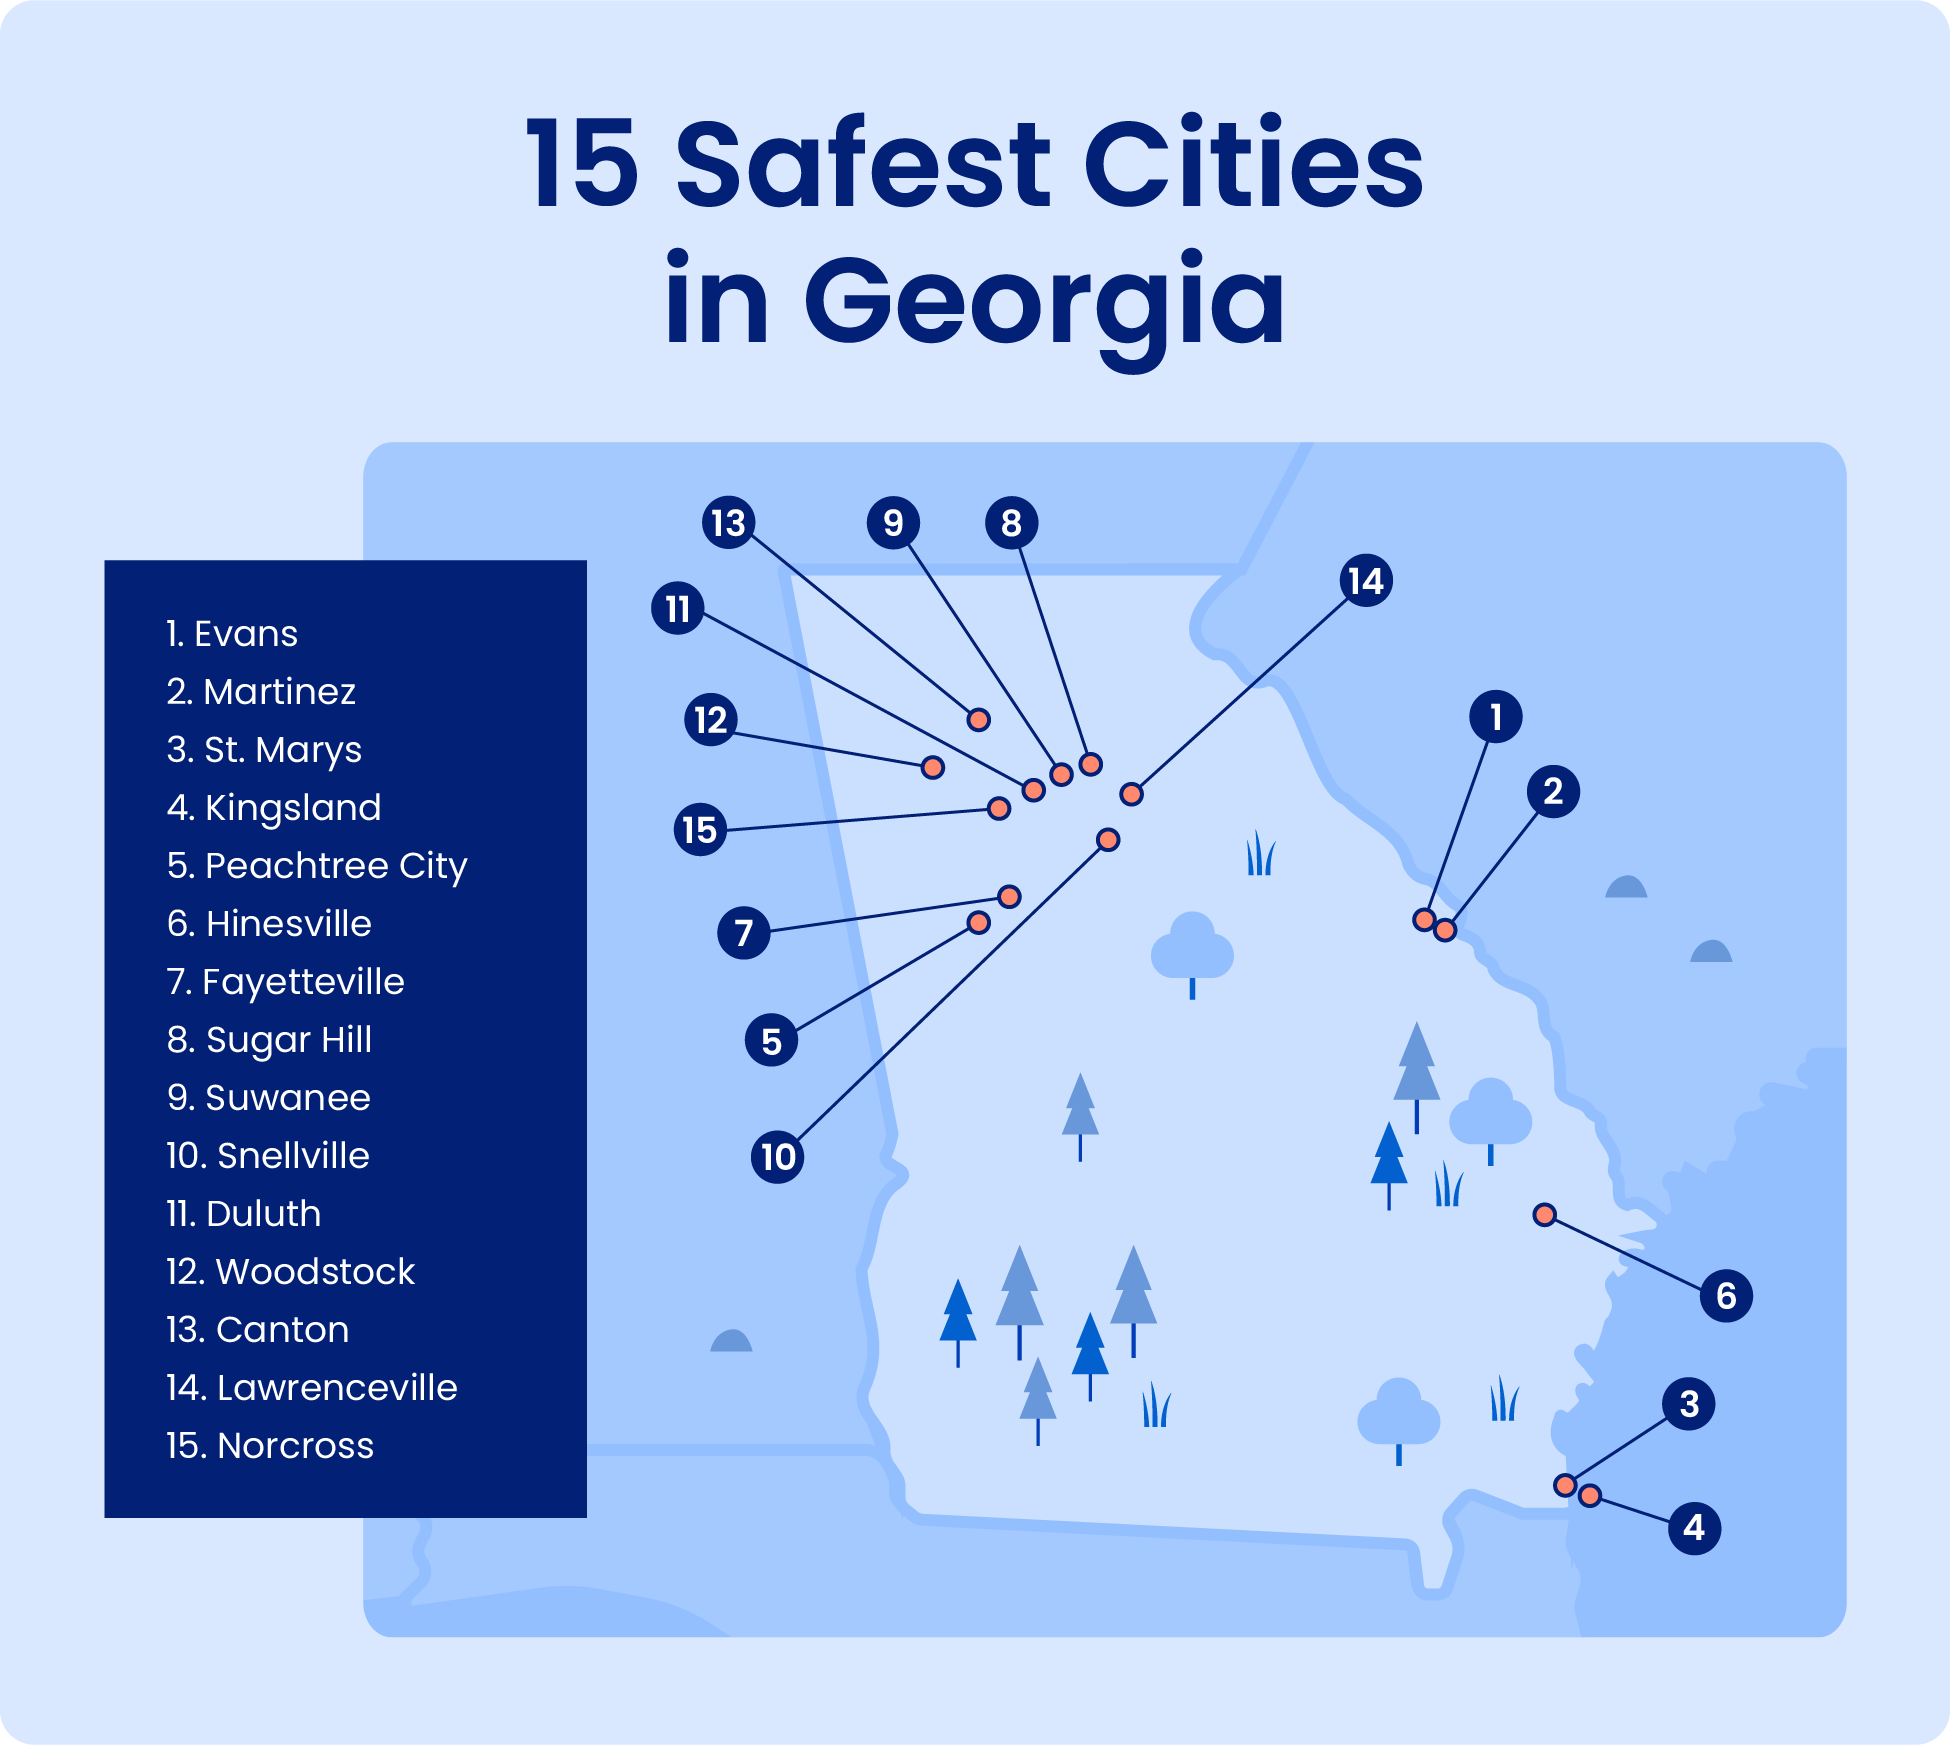 Map shows locations of the 15 safest cities in Georgia.